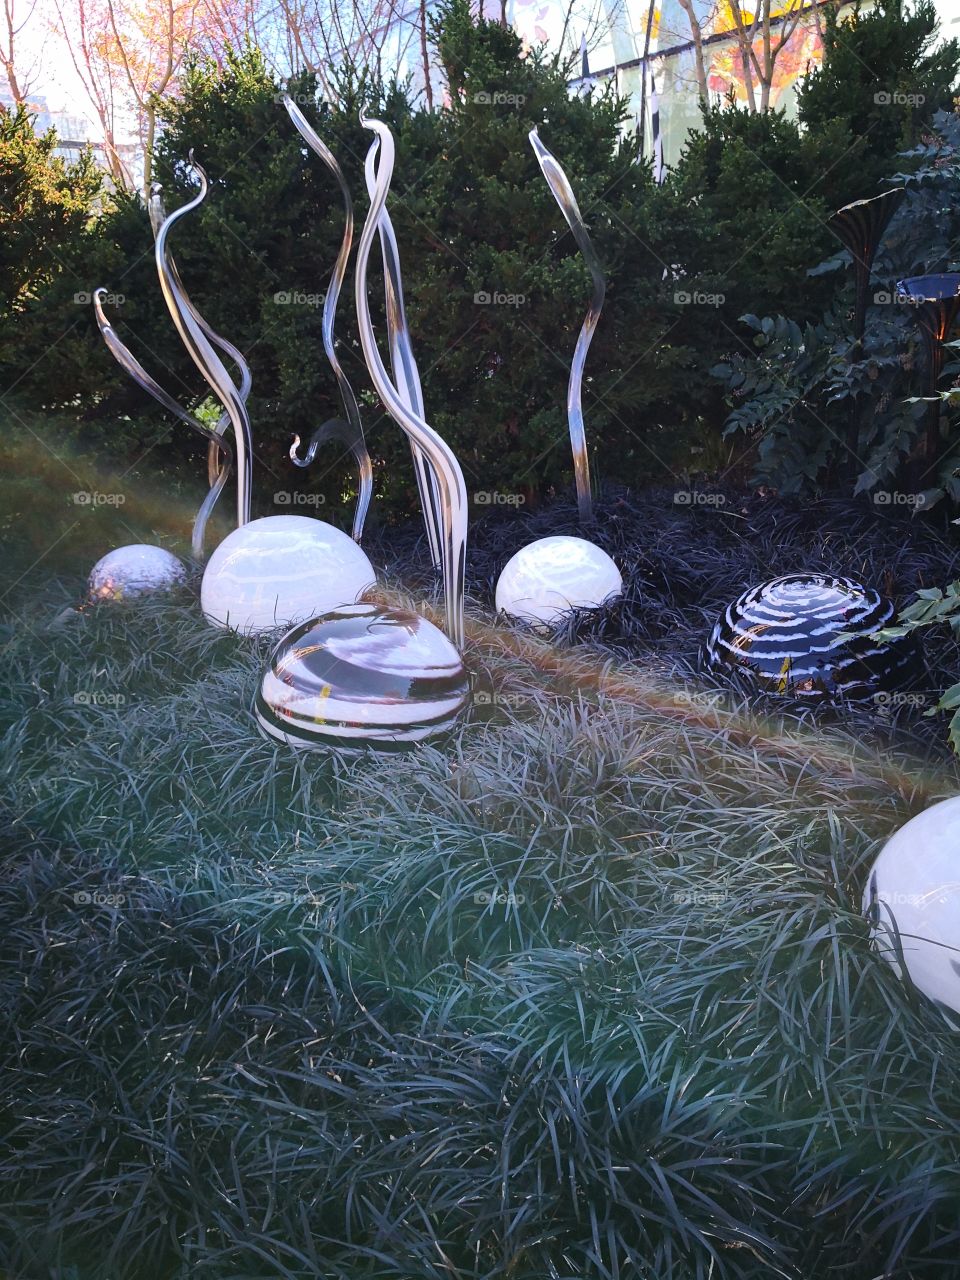 chihuly glass garden in Seattle, WA